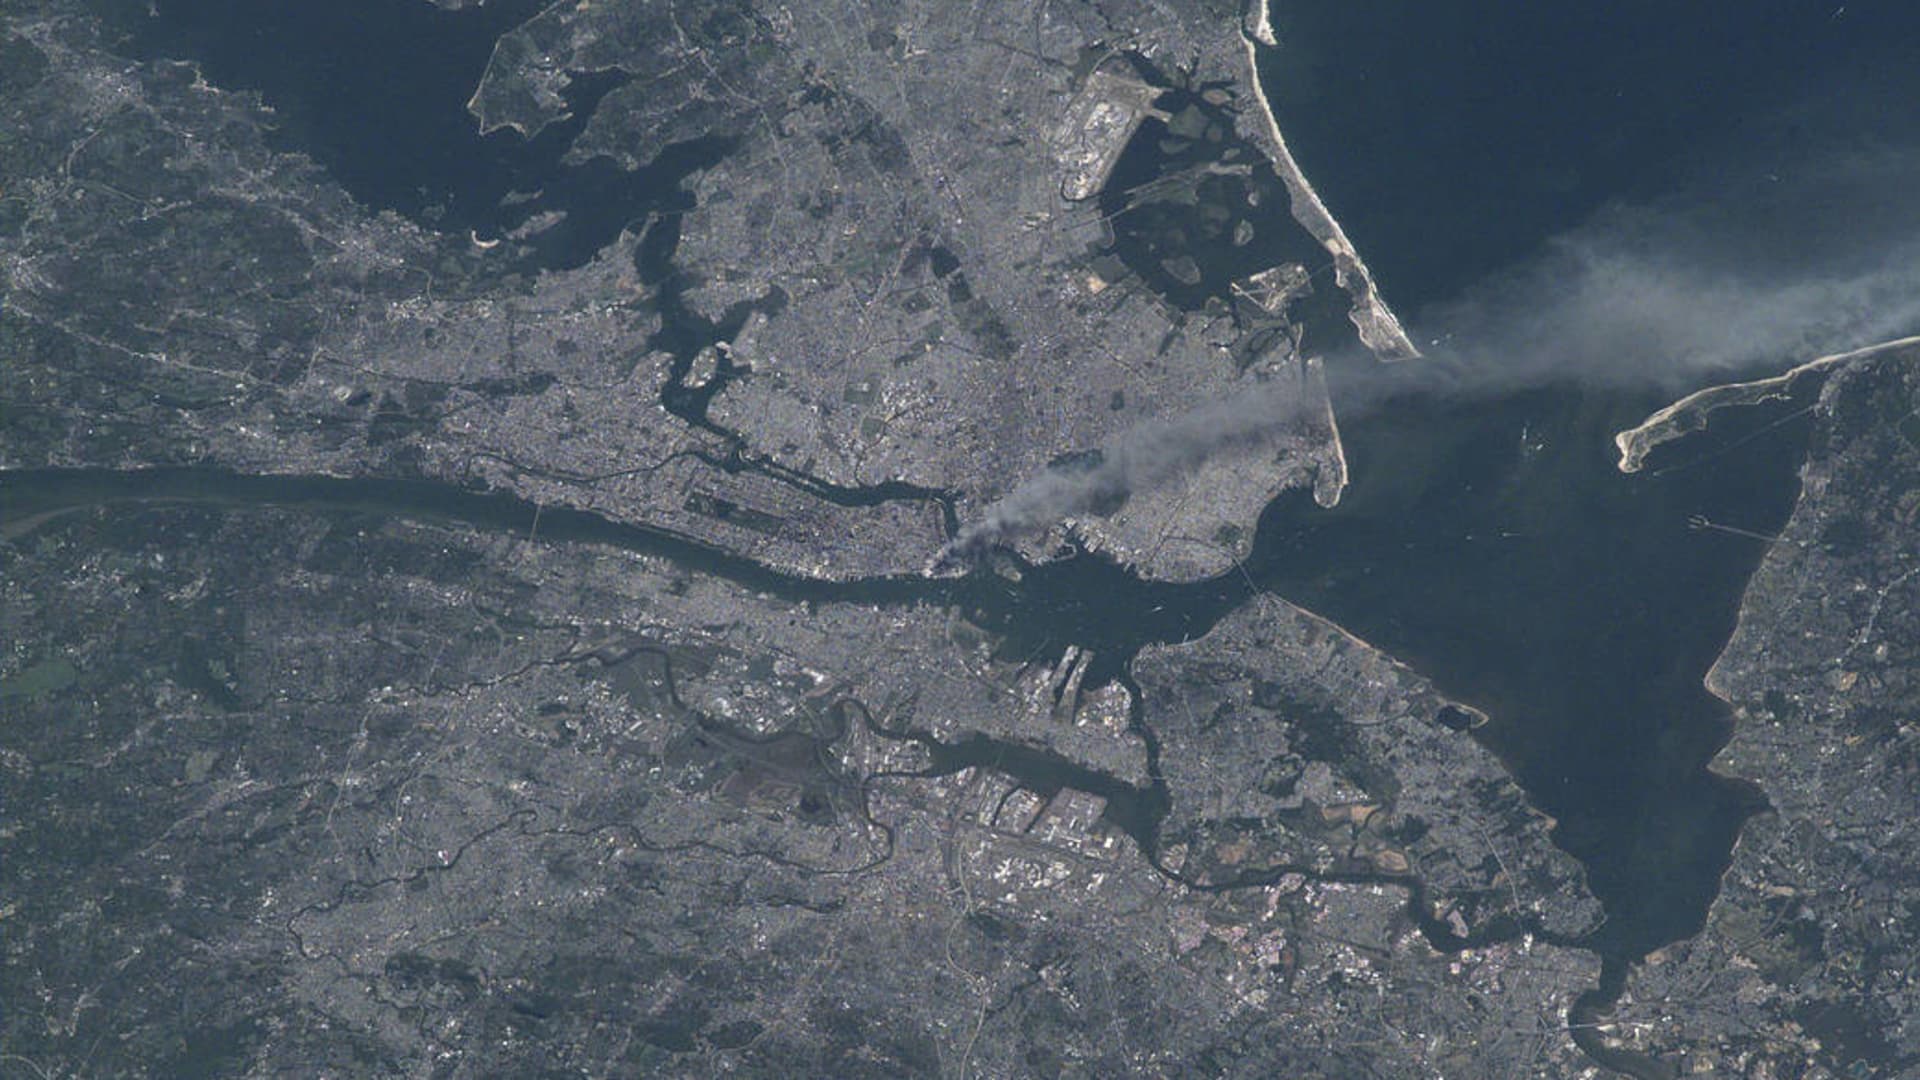 NASA took these images of 9/11 from space 17 years ago